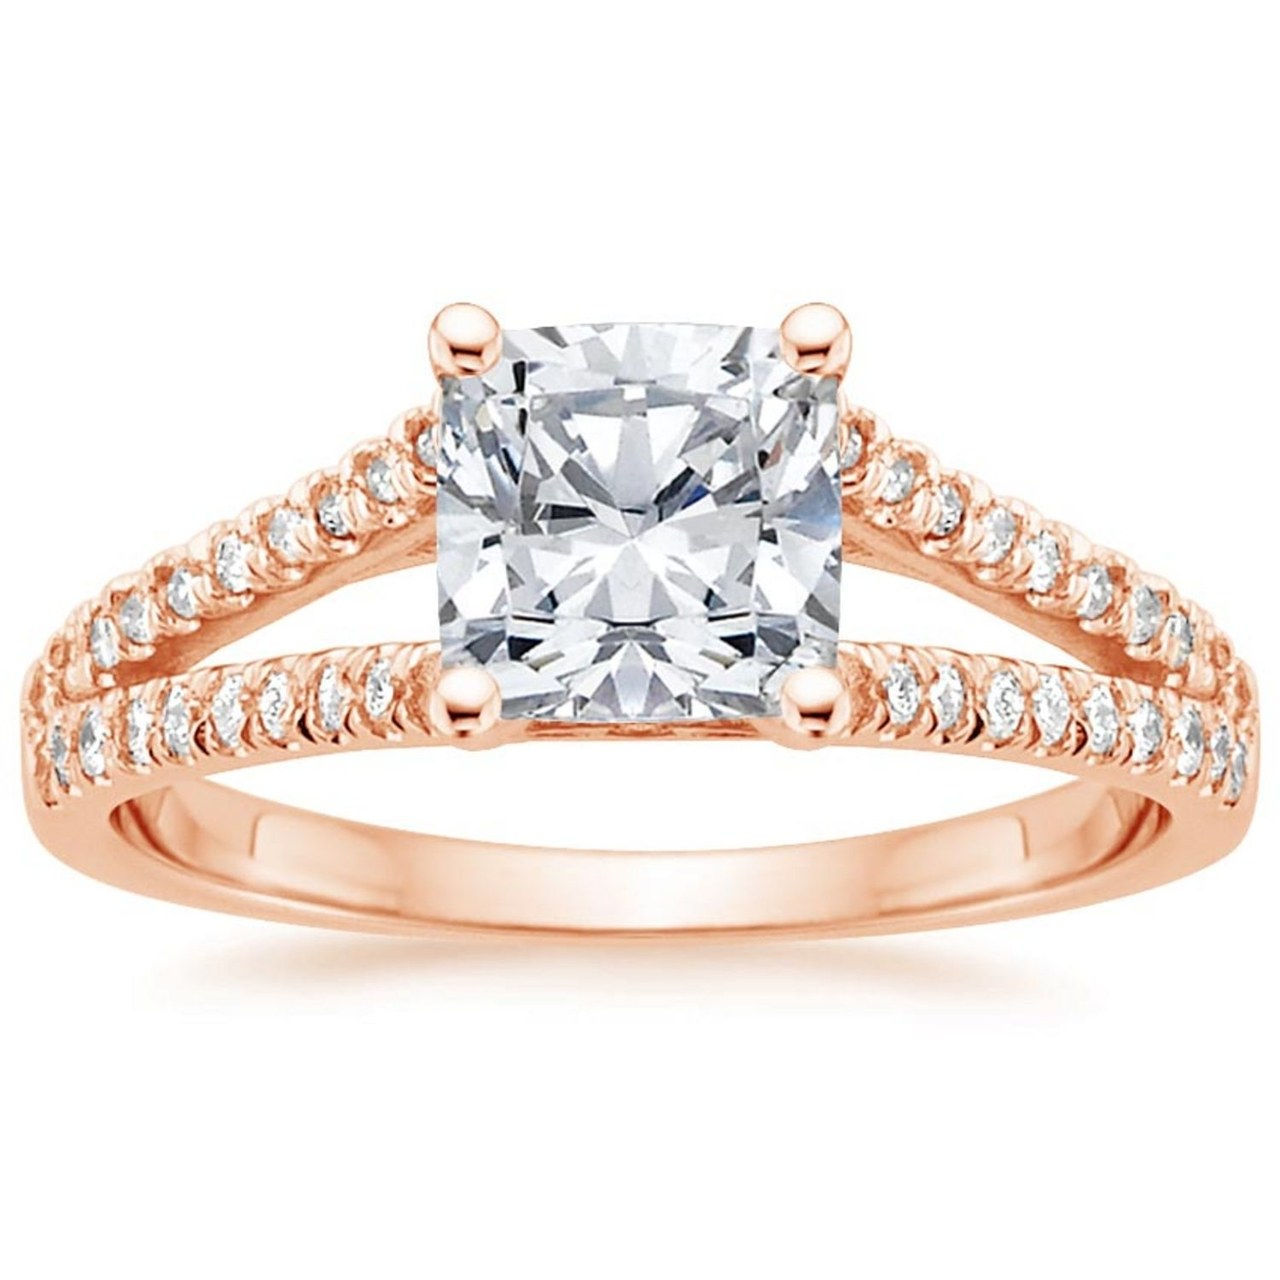 1 best new engagement rings 1229 courtesy brilliant earth